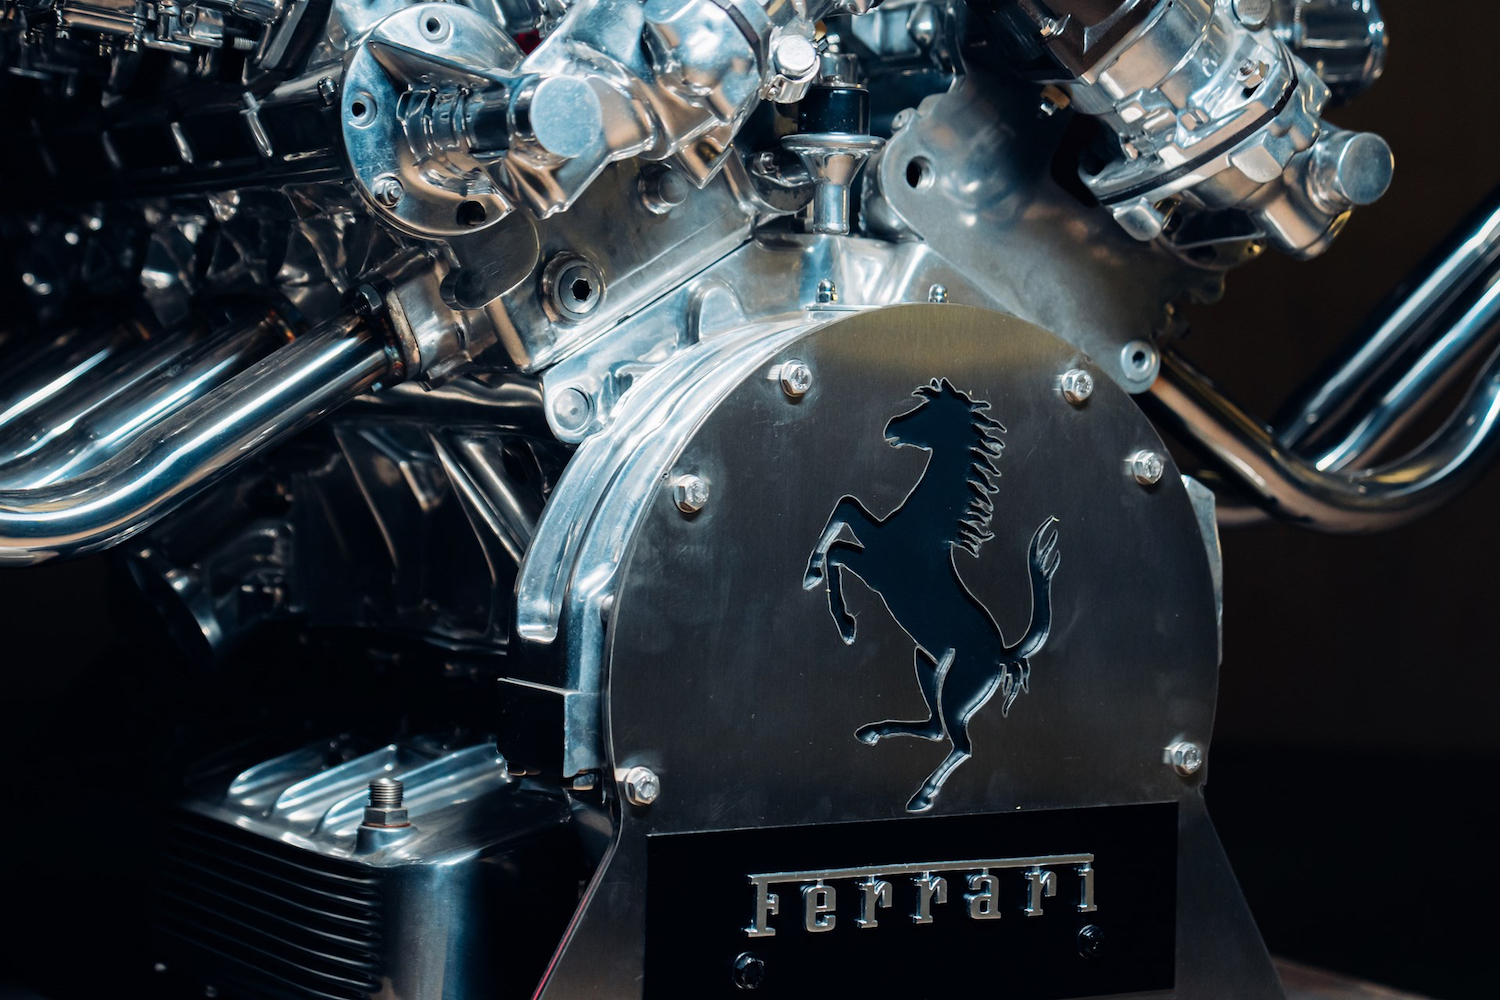 Close up of Ferrari badge on Ferrari V12 Table in front of a black screen.